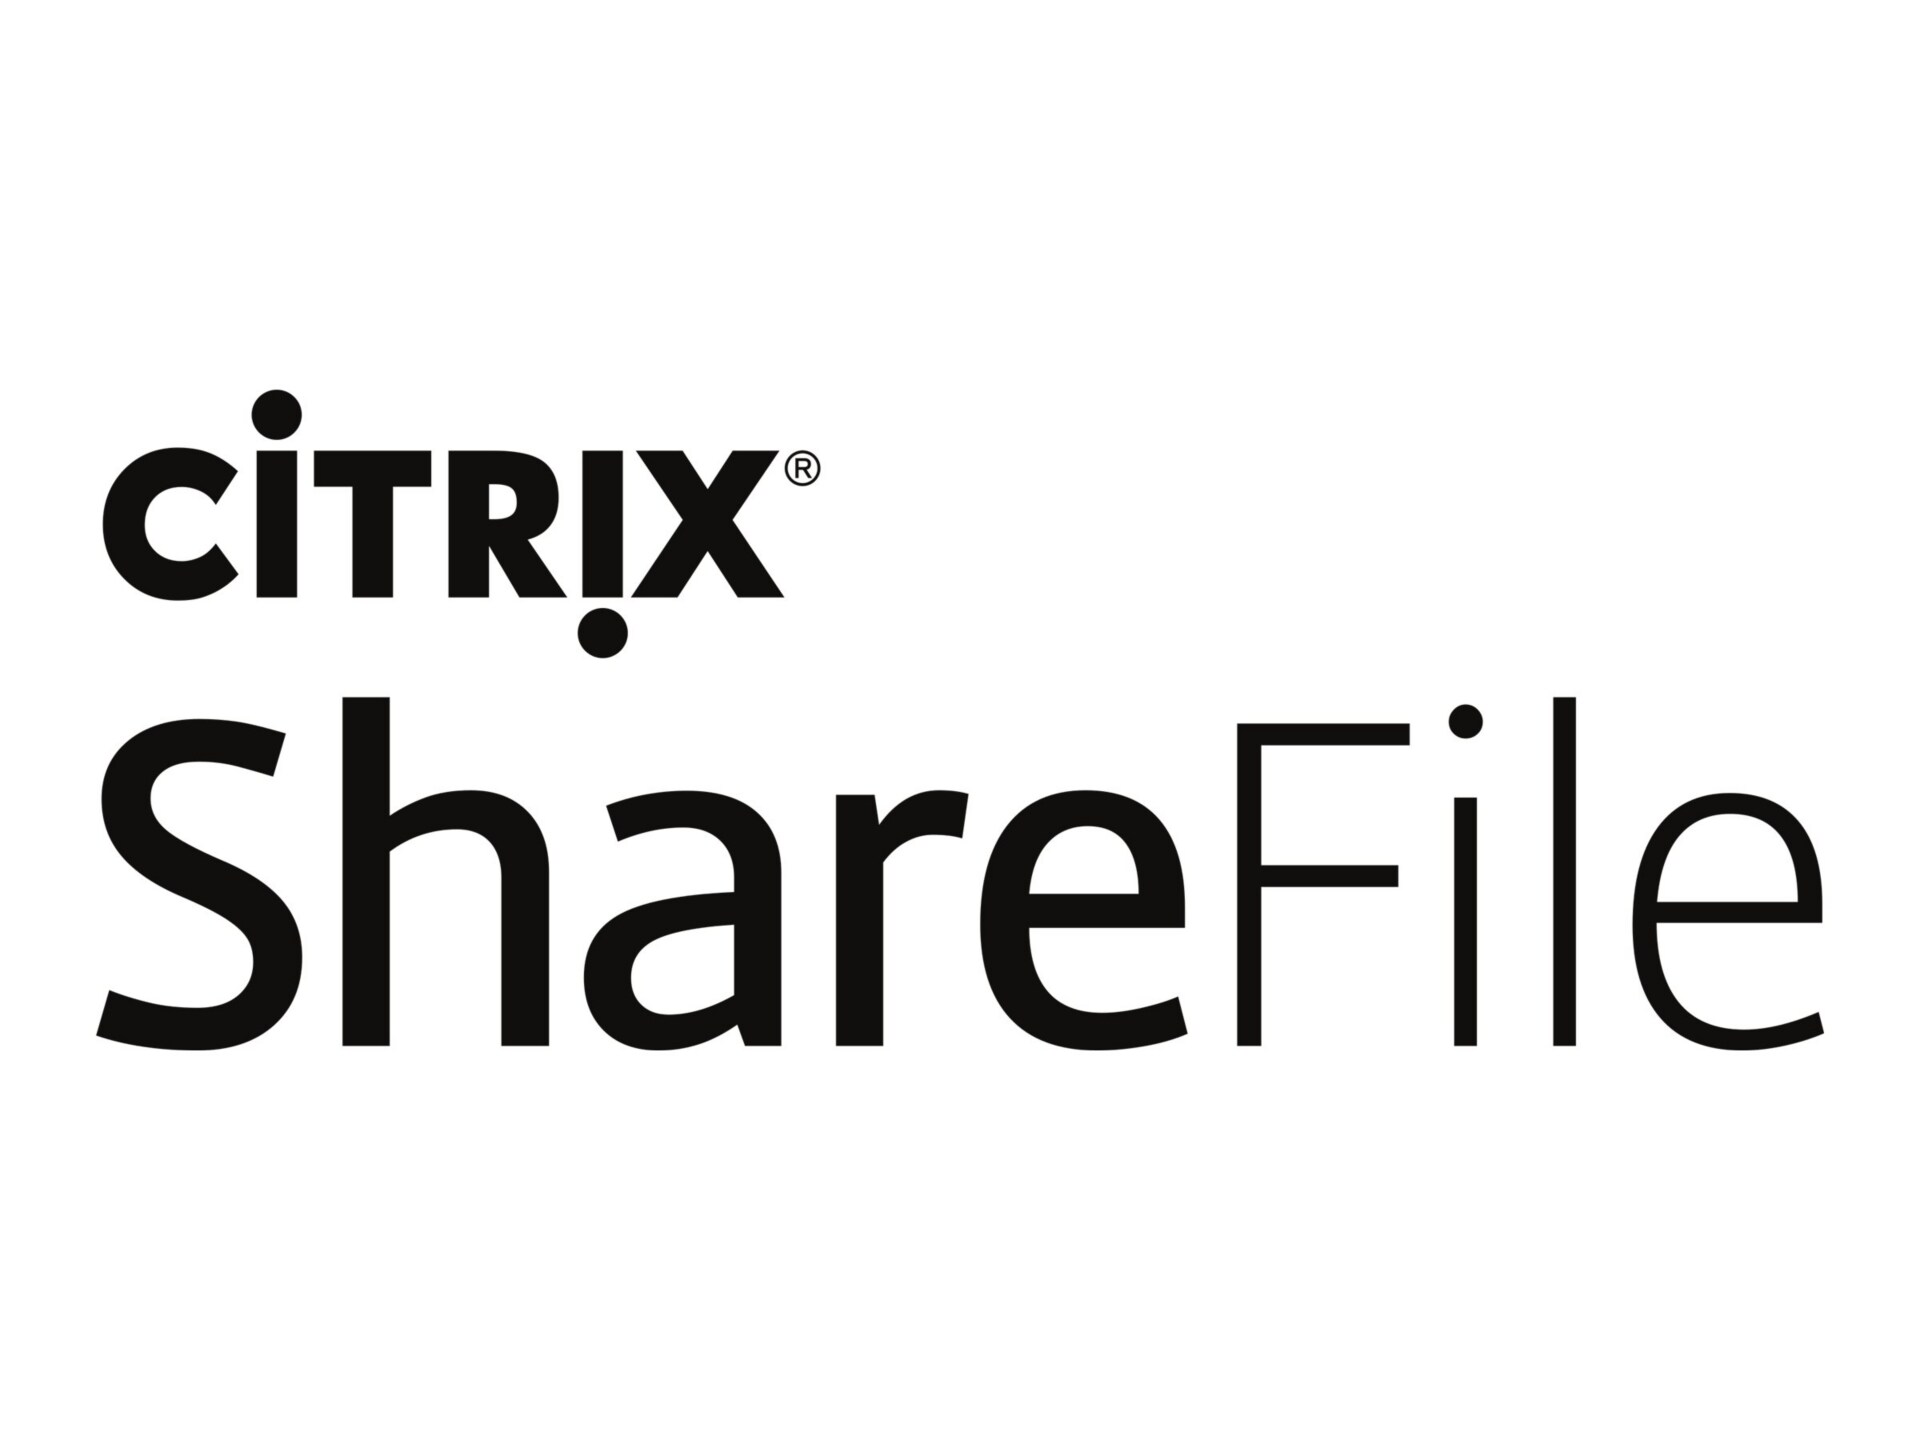 Citrix ShareFile Advanced - subscription license - unlimited capacity